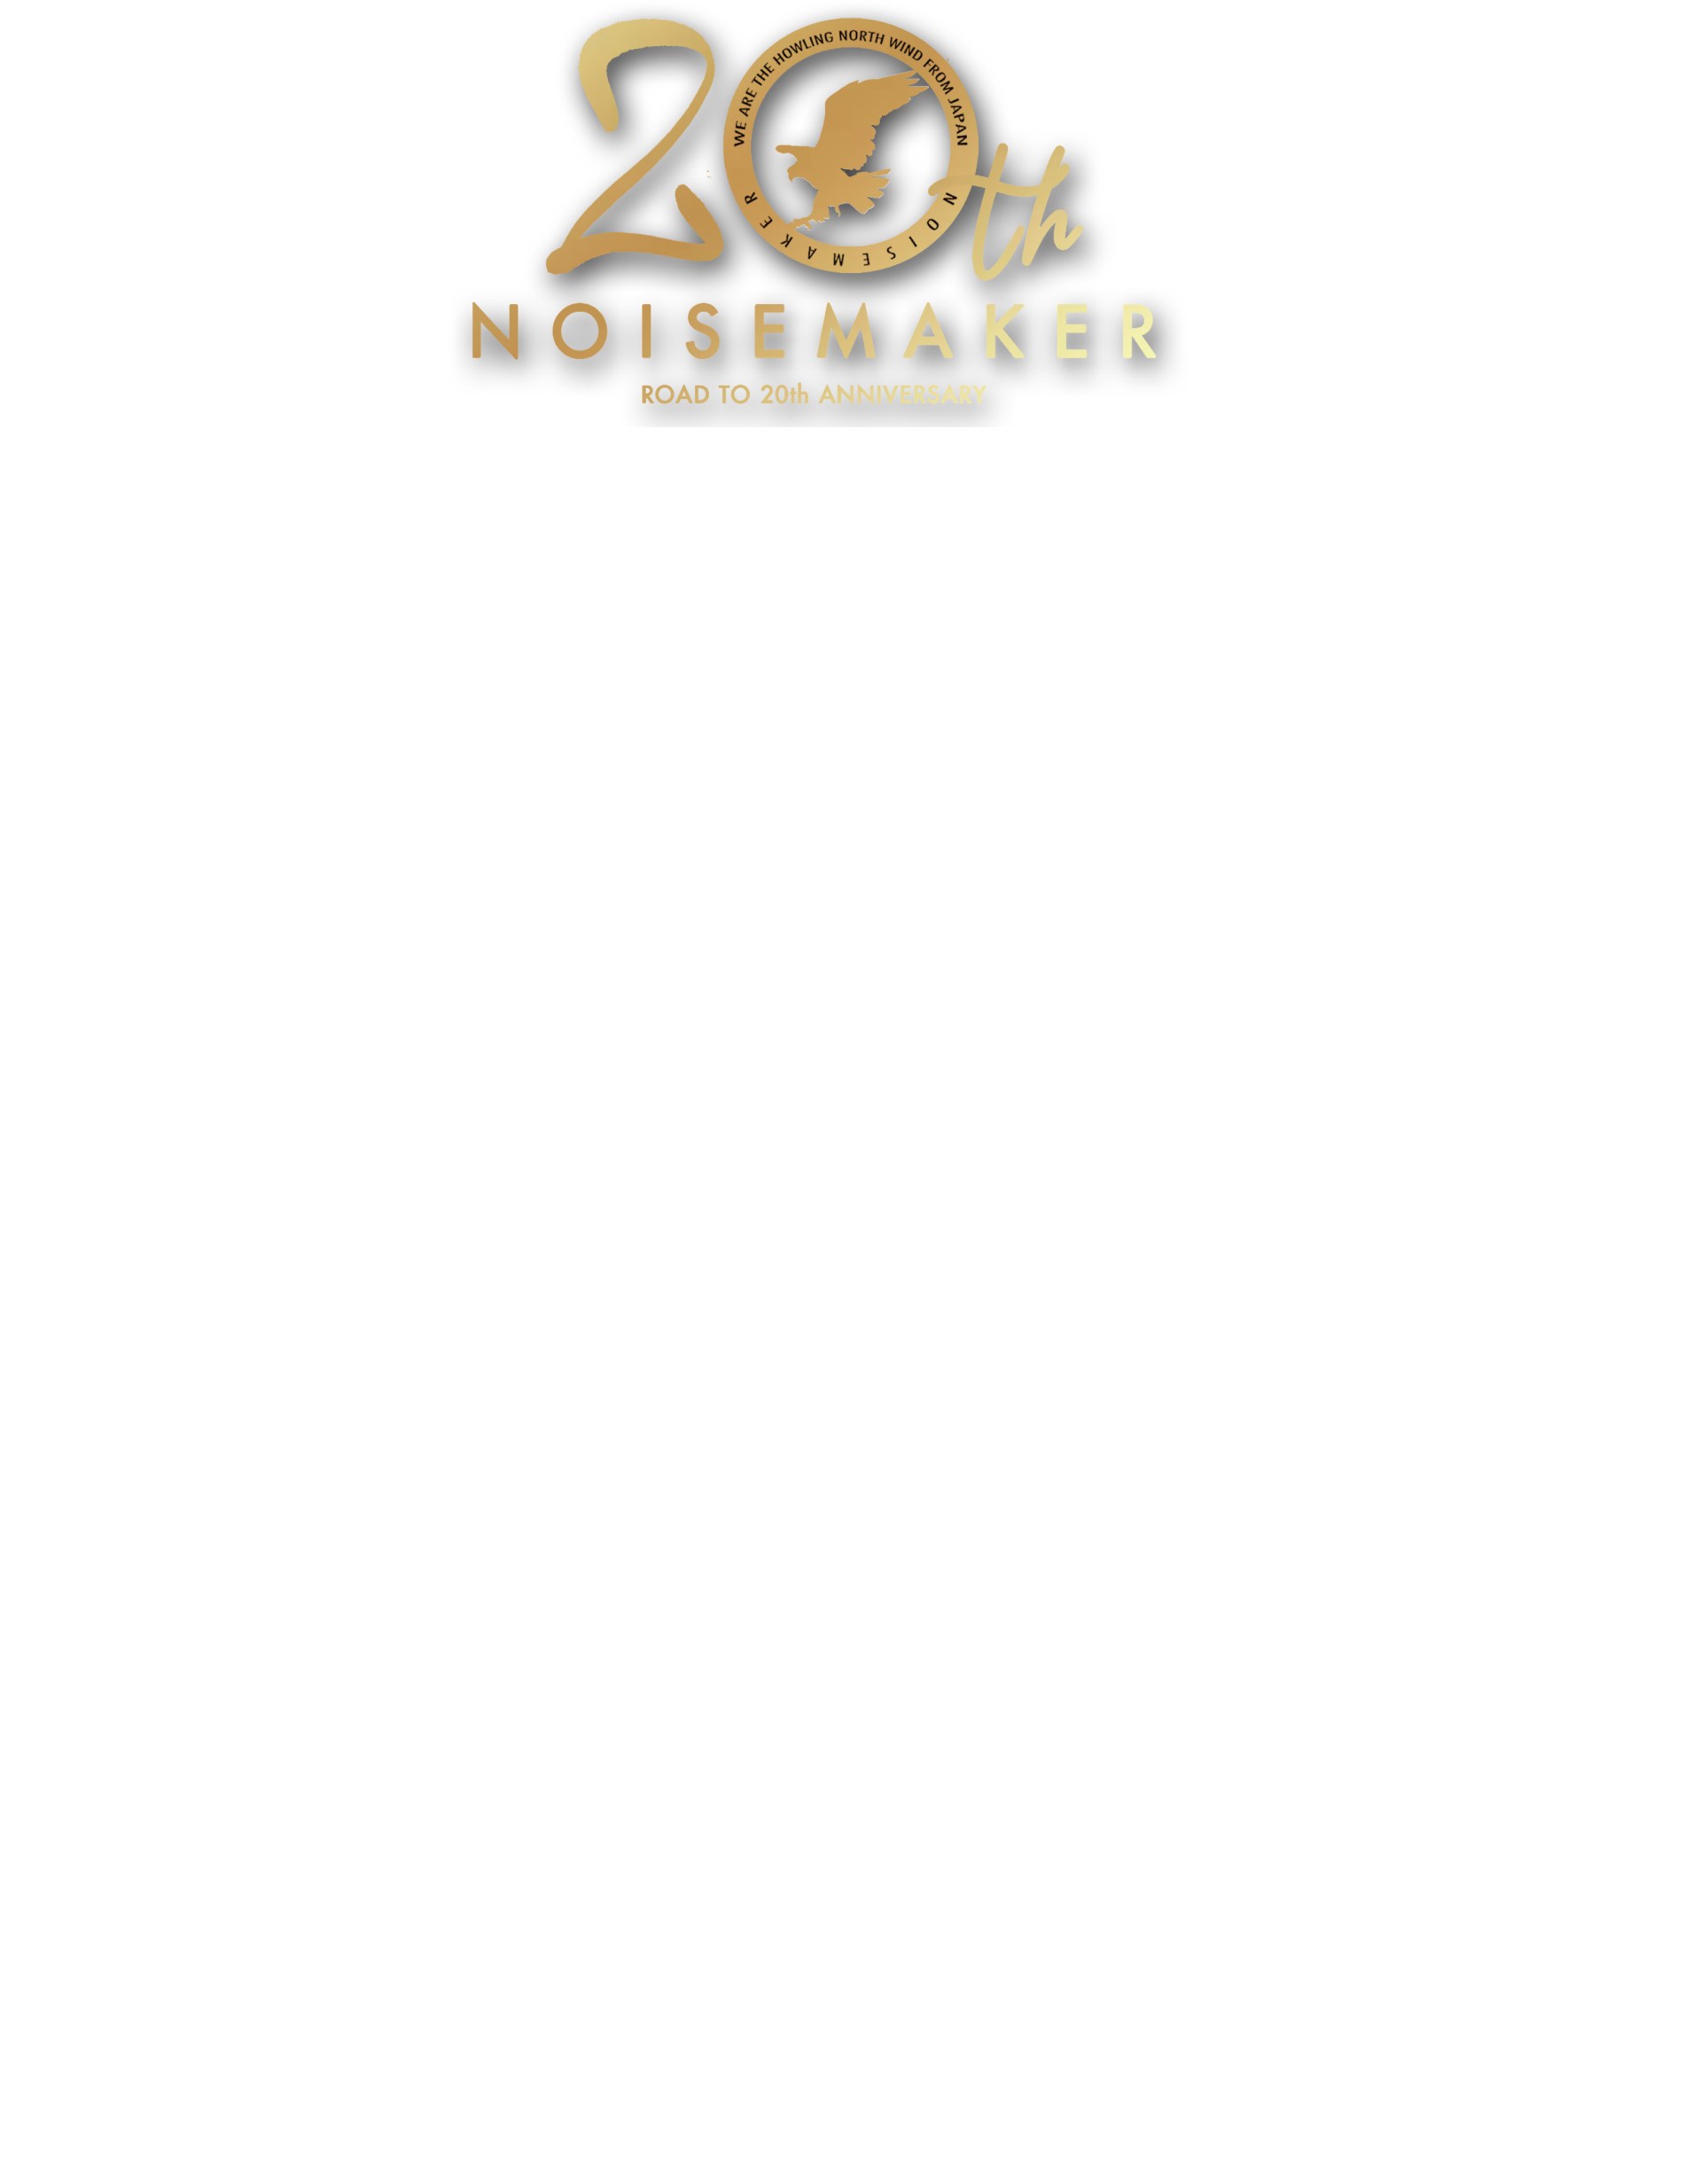 road to 20th anniversary zepp tour